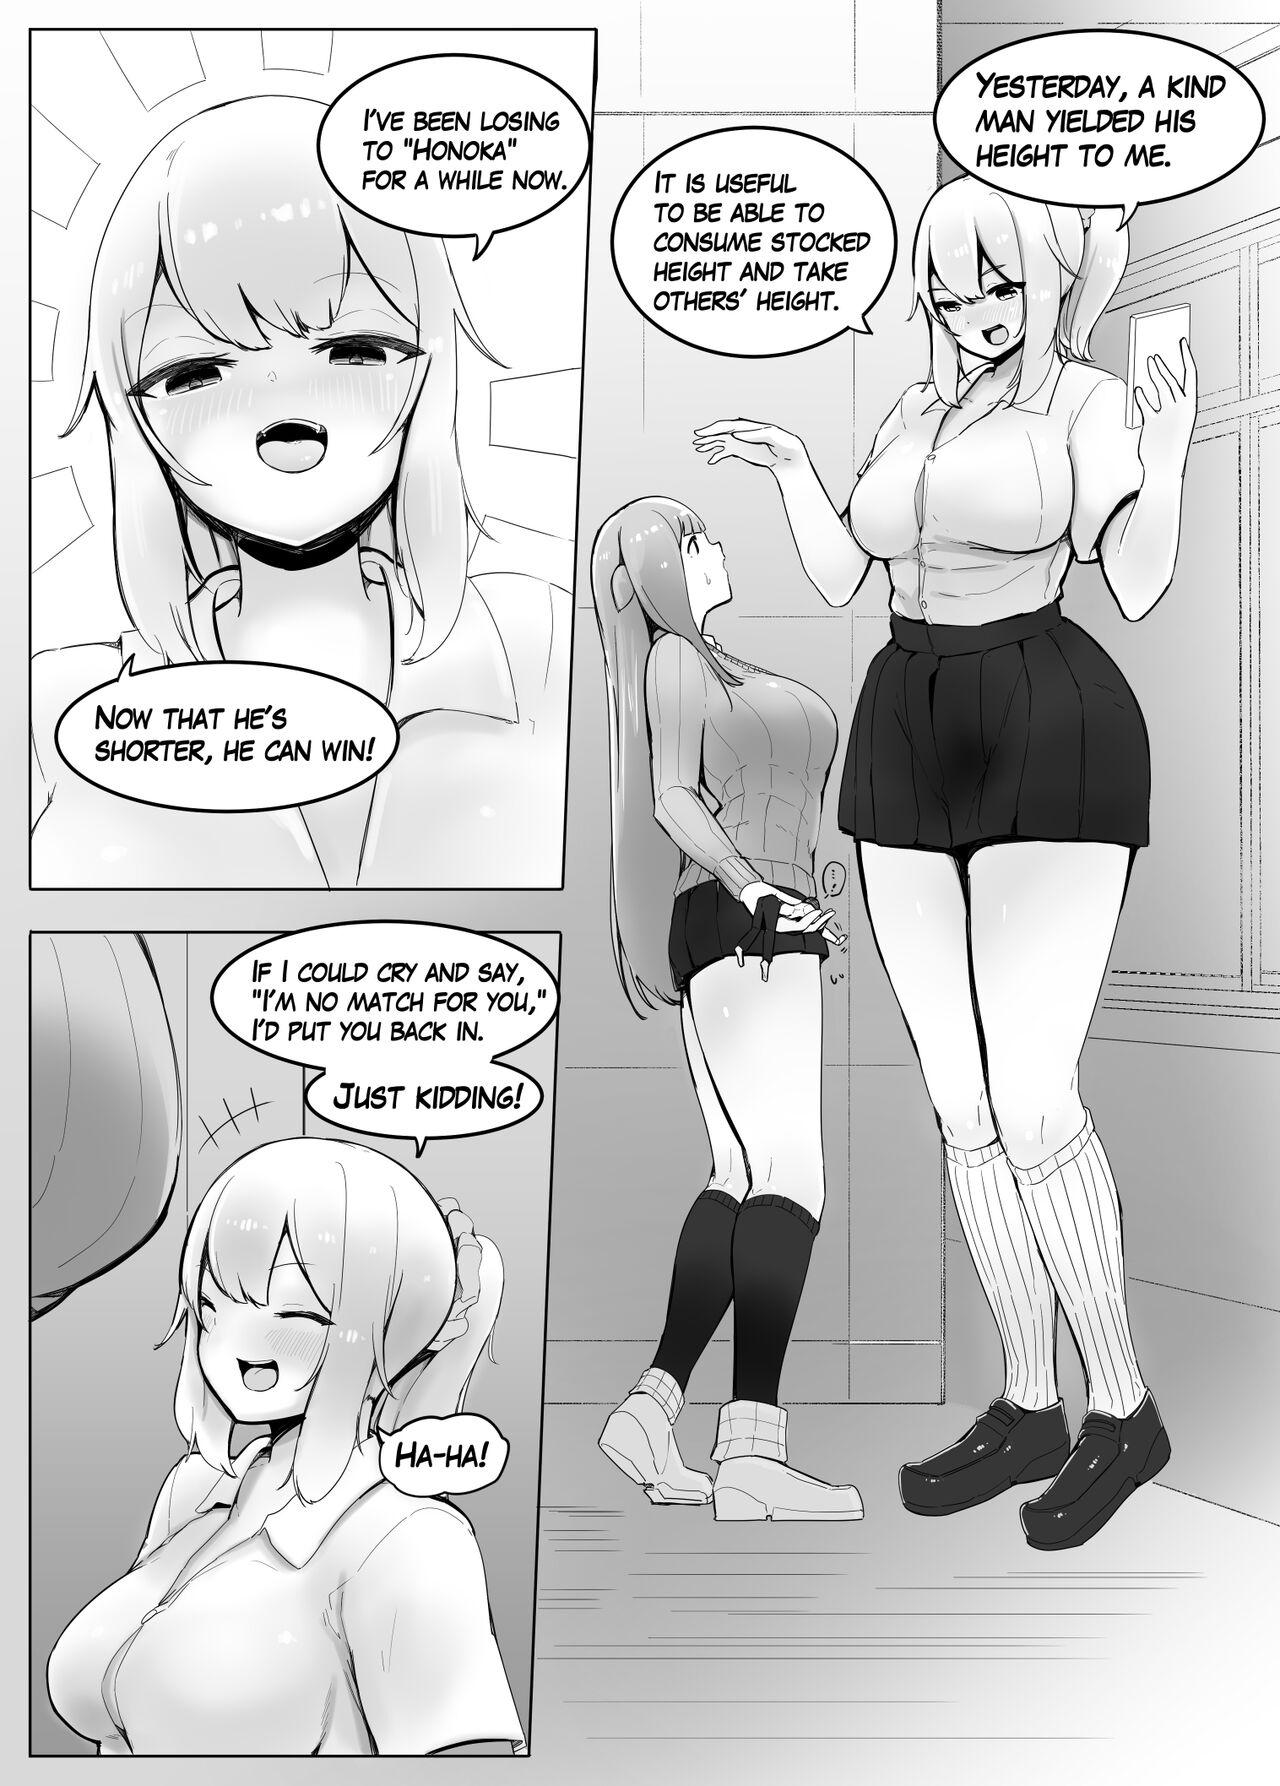 Gay Fetish The Girl Takes My Height. 2 Asses - Page 2